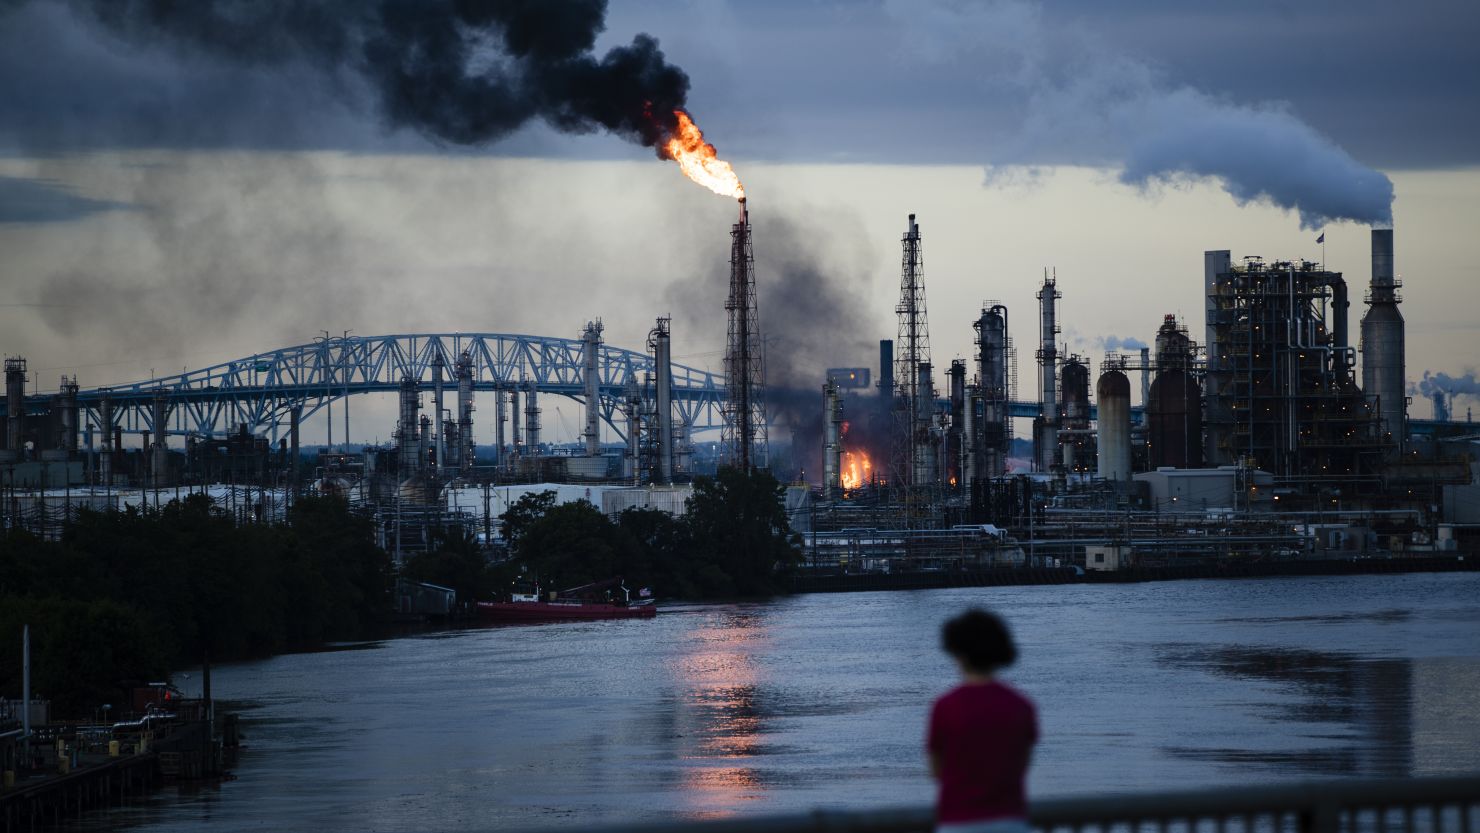 Flames and smoke emerge from the Philadelphia Energy Solutions Refining Complex in Philadelphia, on June 21, 2019.